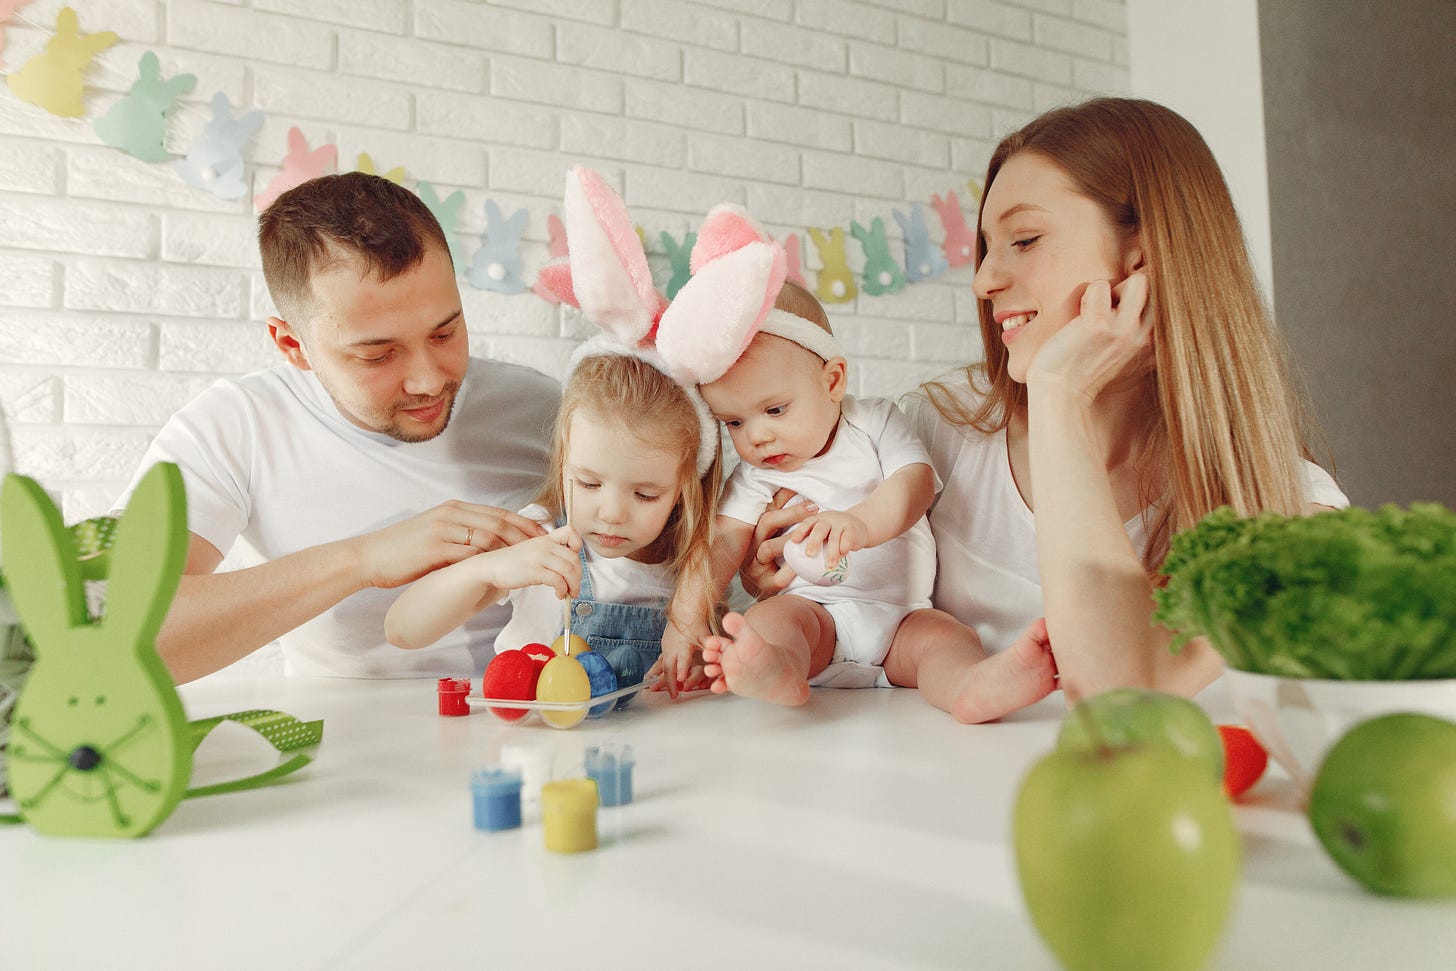 Family with two kids in a kitchen preparing to easter